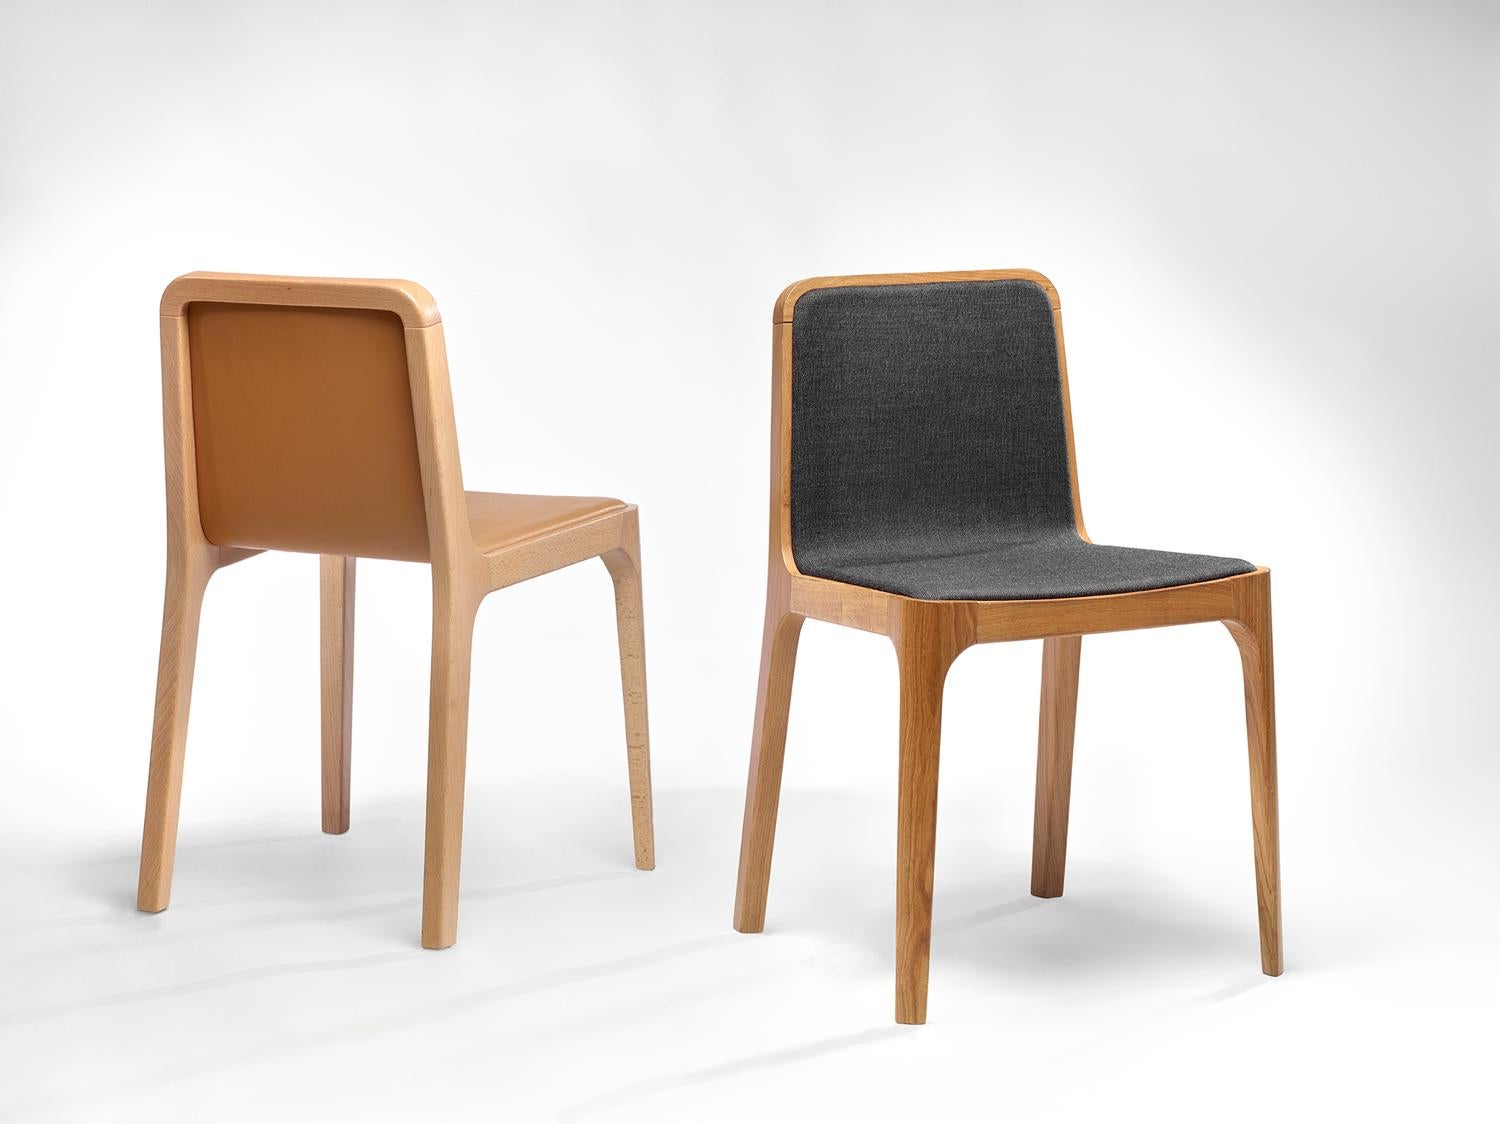 Hand-Crafted Minimalist Modern Chair in Beech Wood Fabric Upholstery